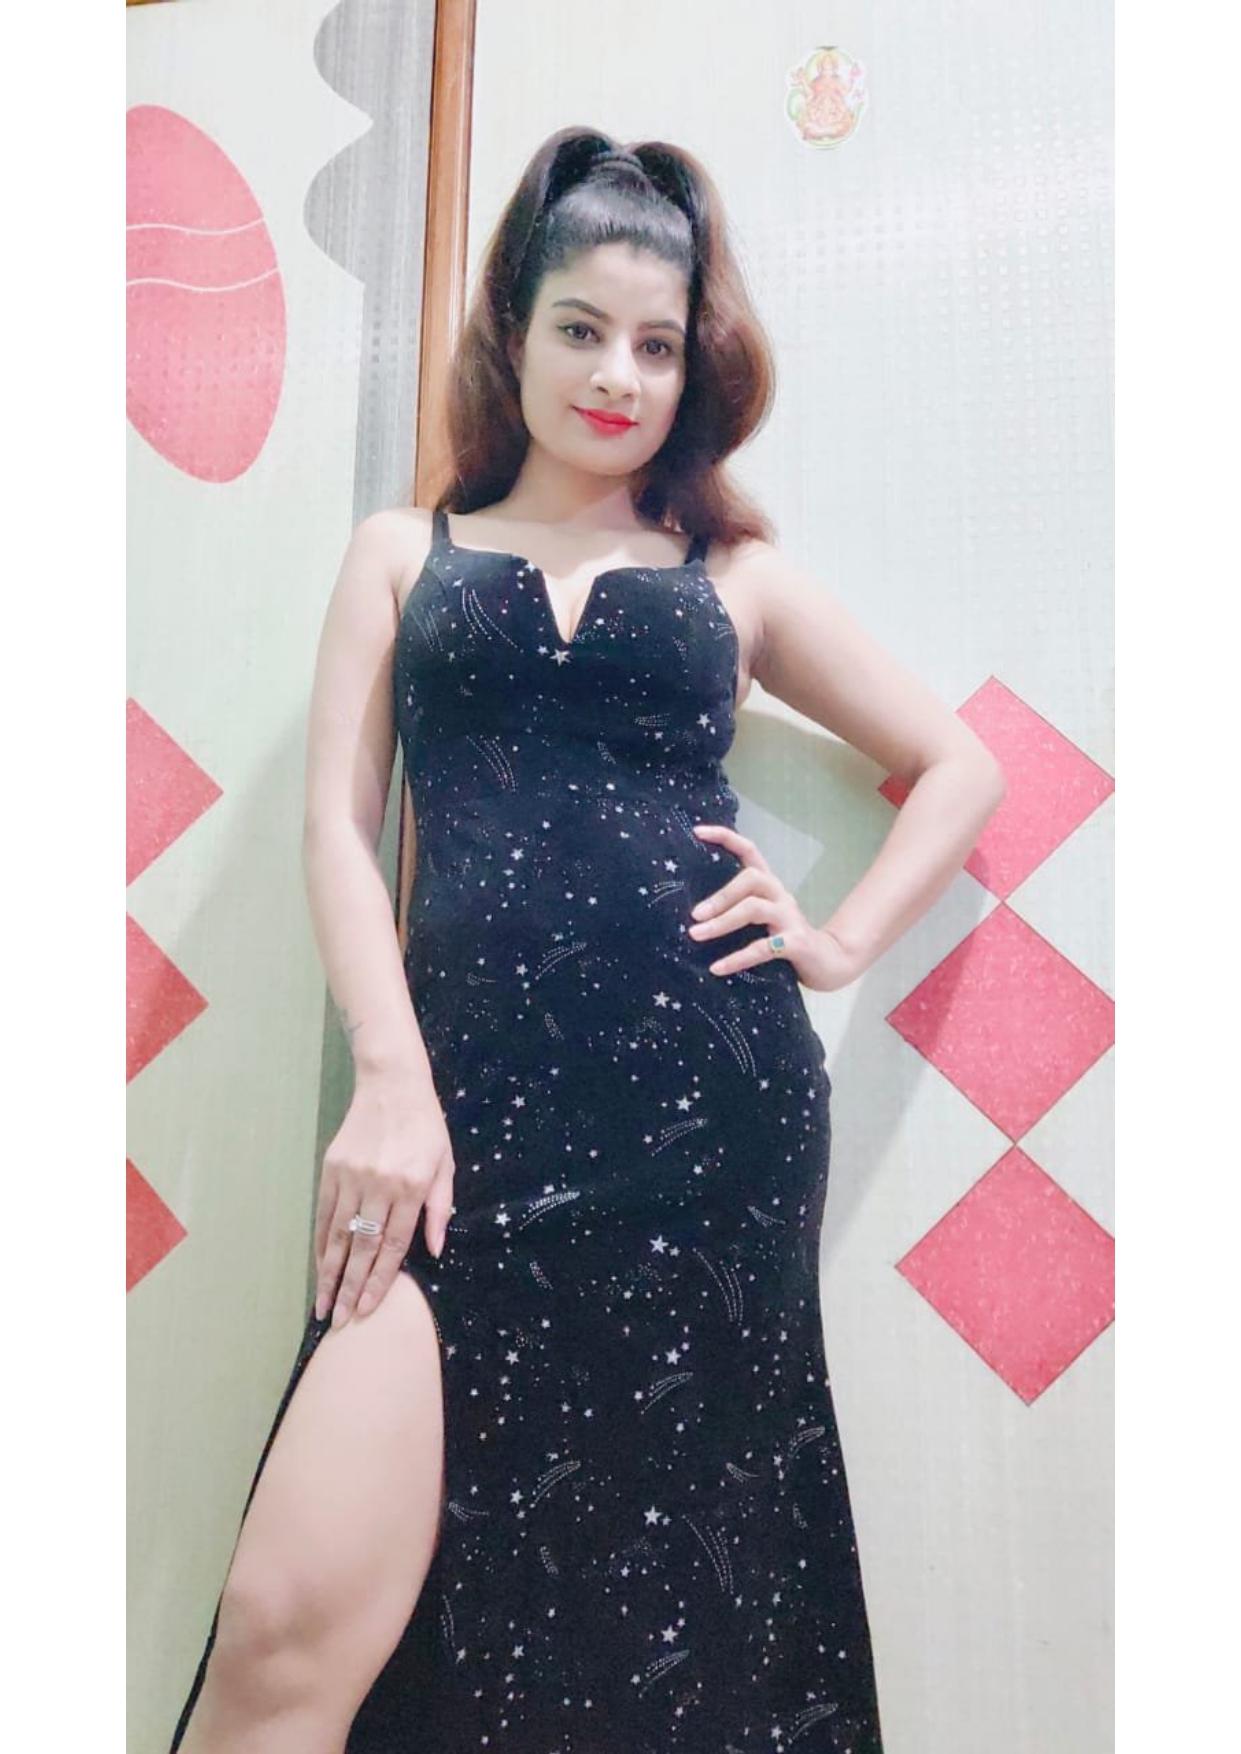 Mysore call girl number 100% Real and genuine